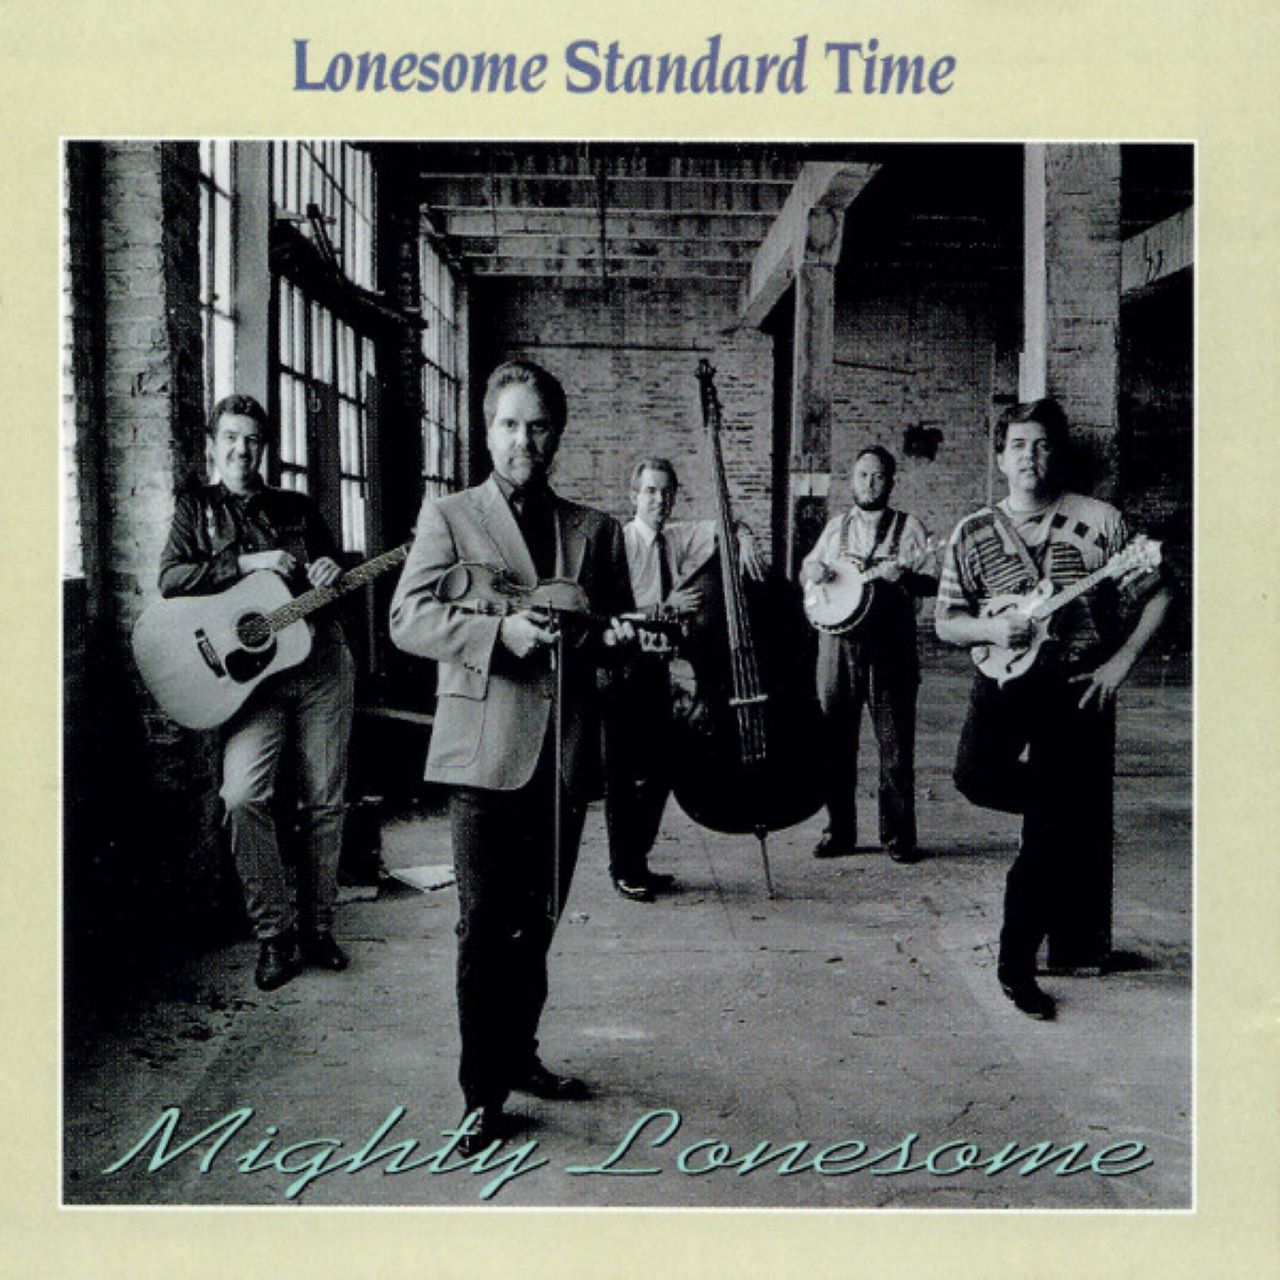 Lonesome Standard Time - Mighty Lonesome cover album